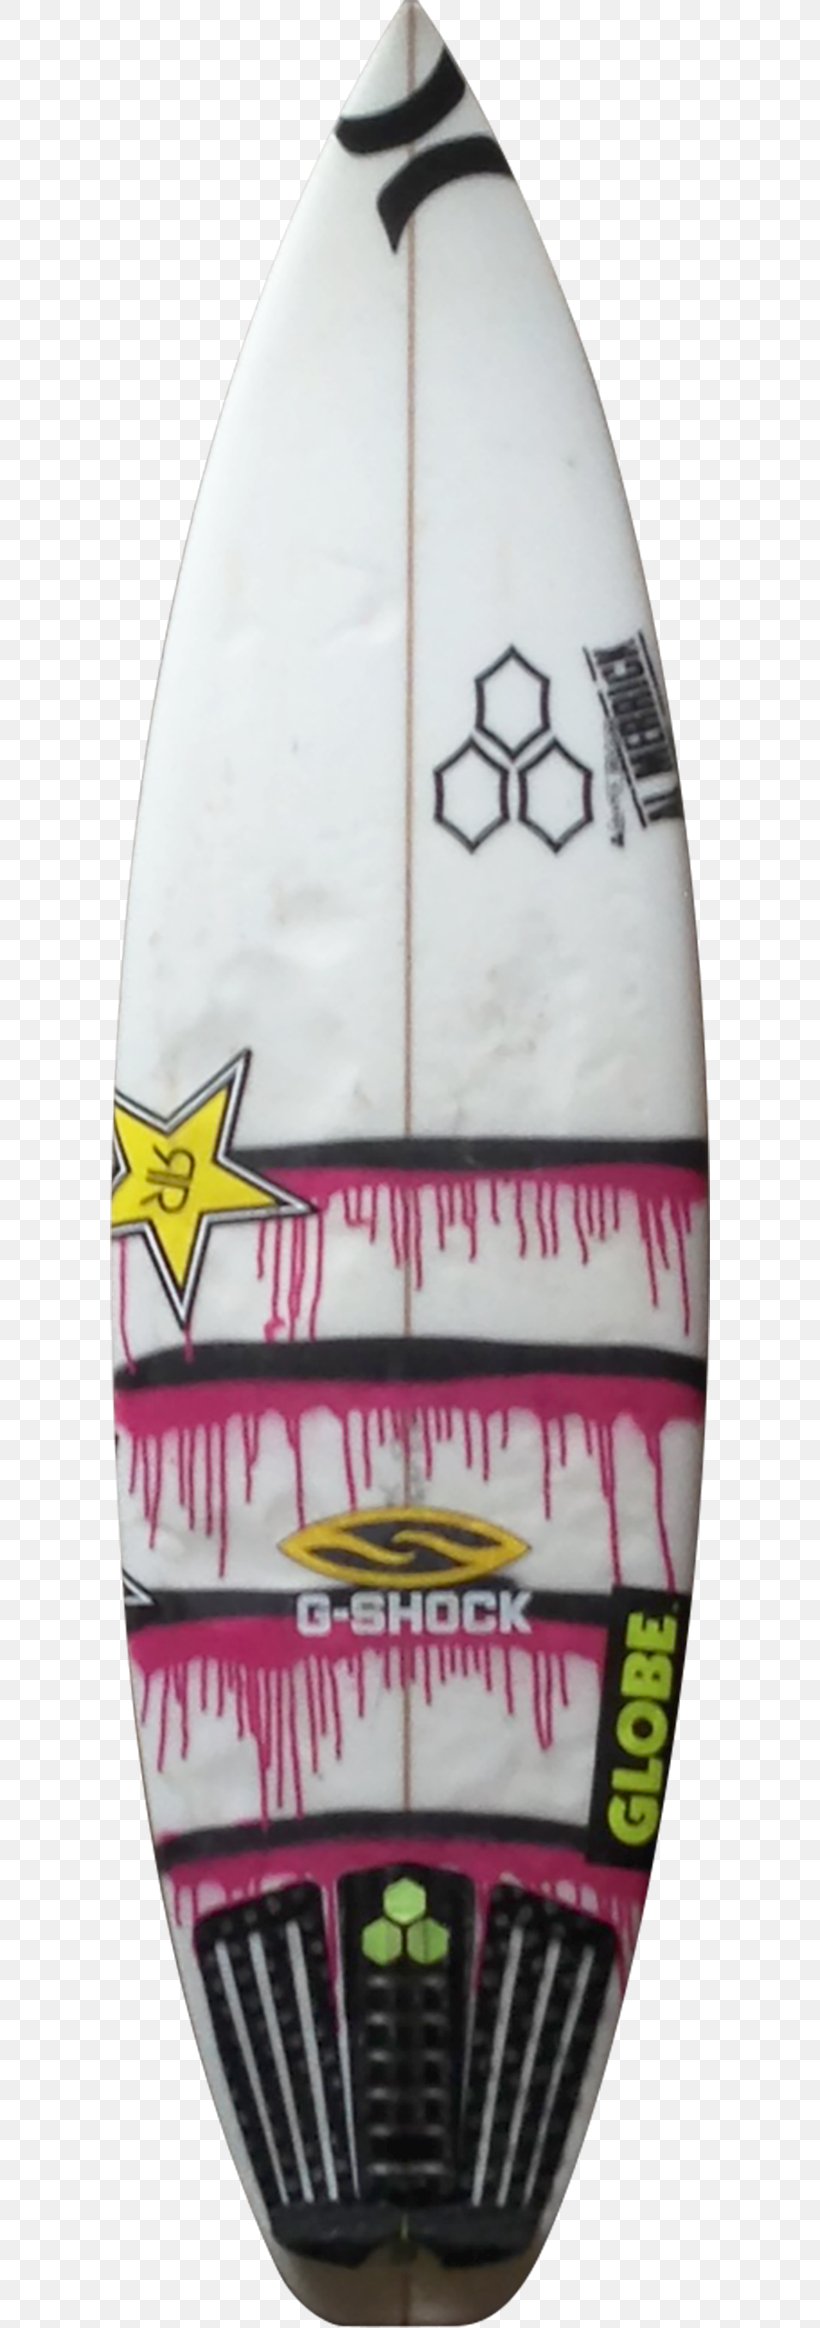 Channel Islands Surfboards Surfing Matériel De Surf Weight, PNG, 600x2328px, Surfboard, Aerosol Paint, Car, Cheese, Coffee Download Free